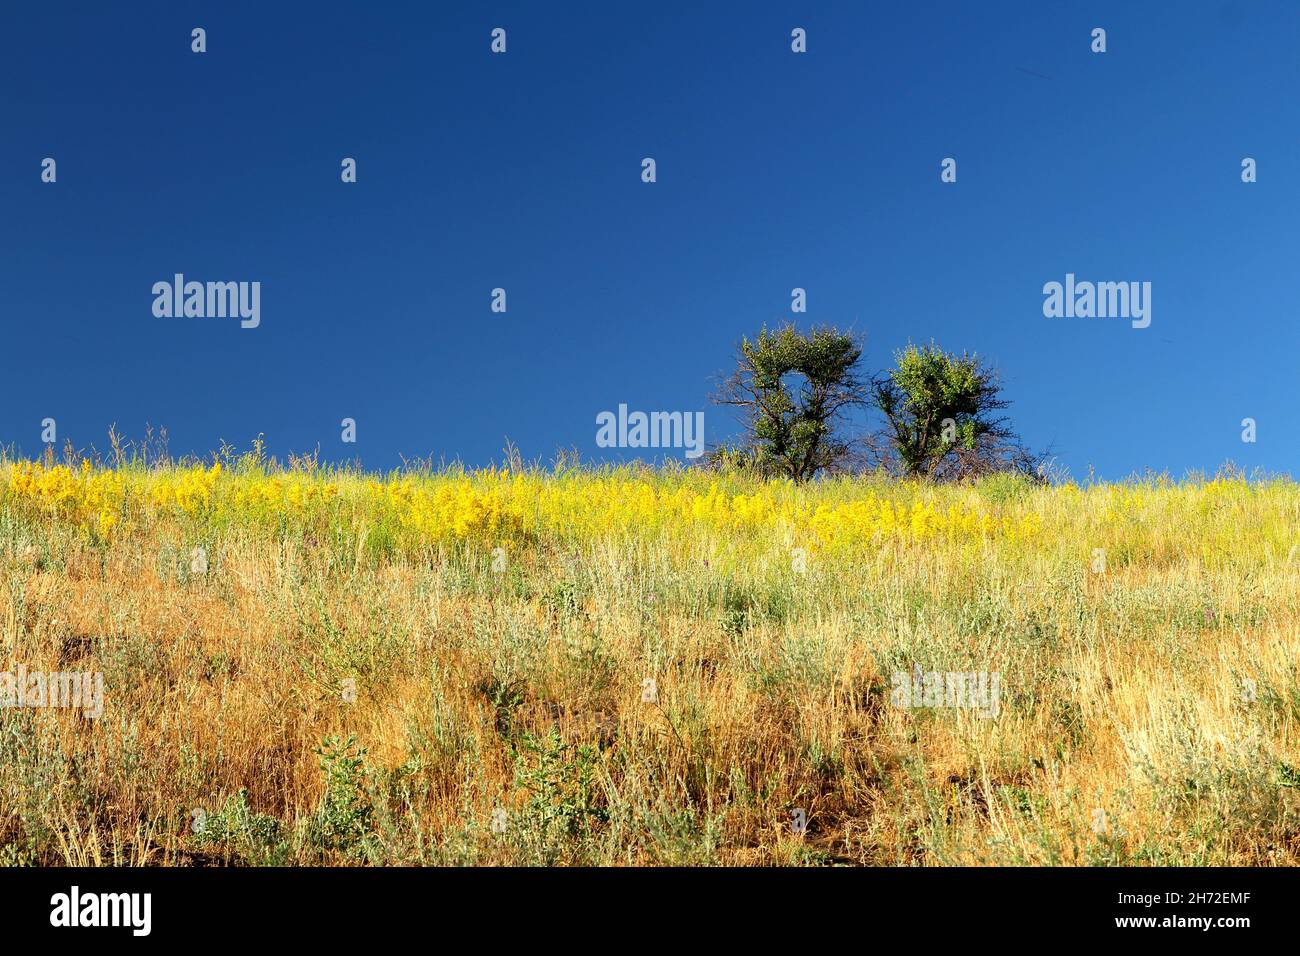 Two small trees growing on the horizon between blue sky and grassland. Stock Photo